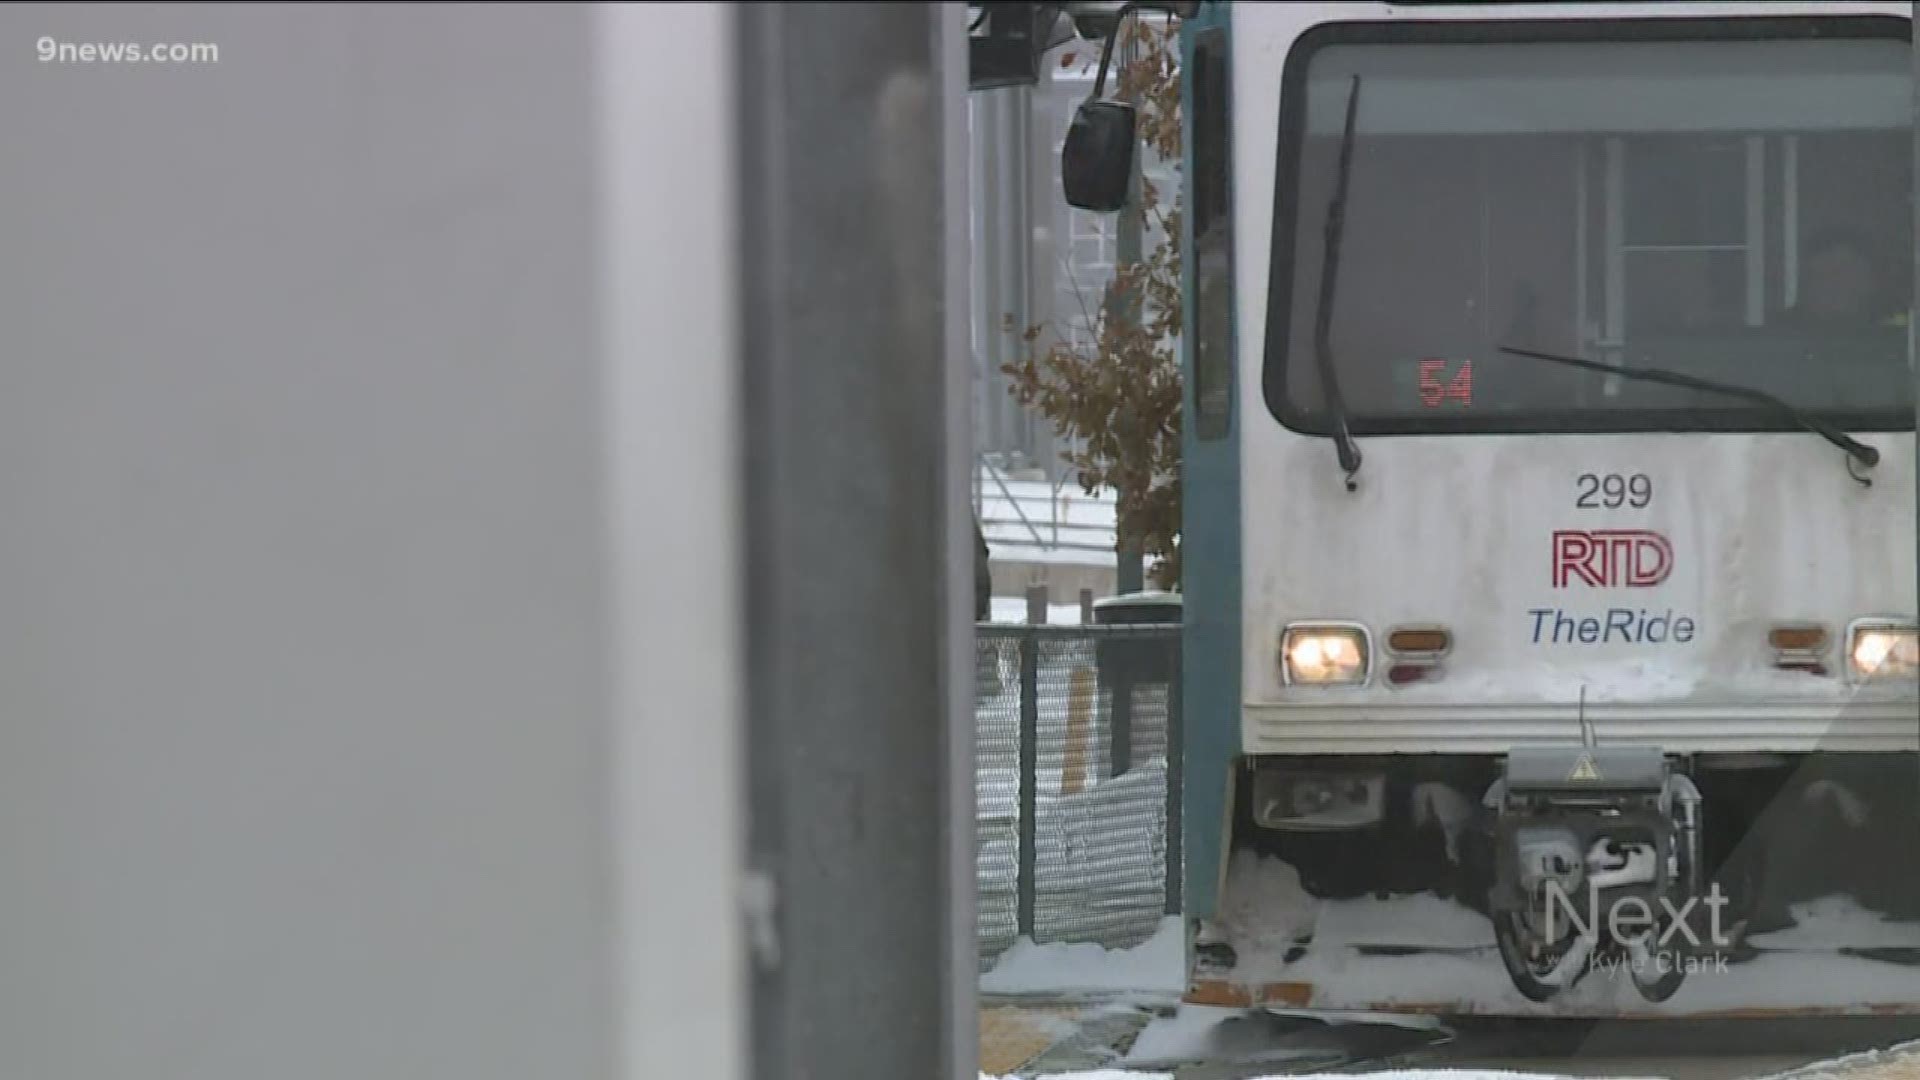 11 light rail operators didn't come to work Tuesday, which meant RTD had to cancel nearly 1 in 10 of its train trips for the day.